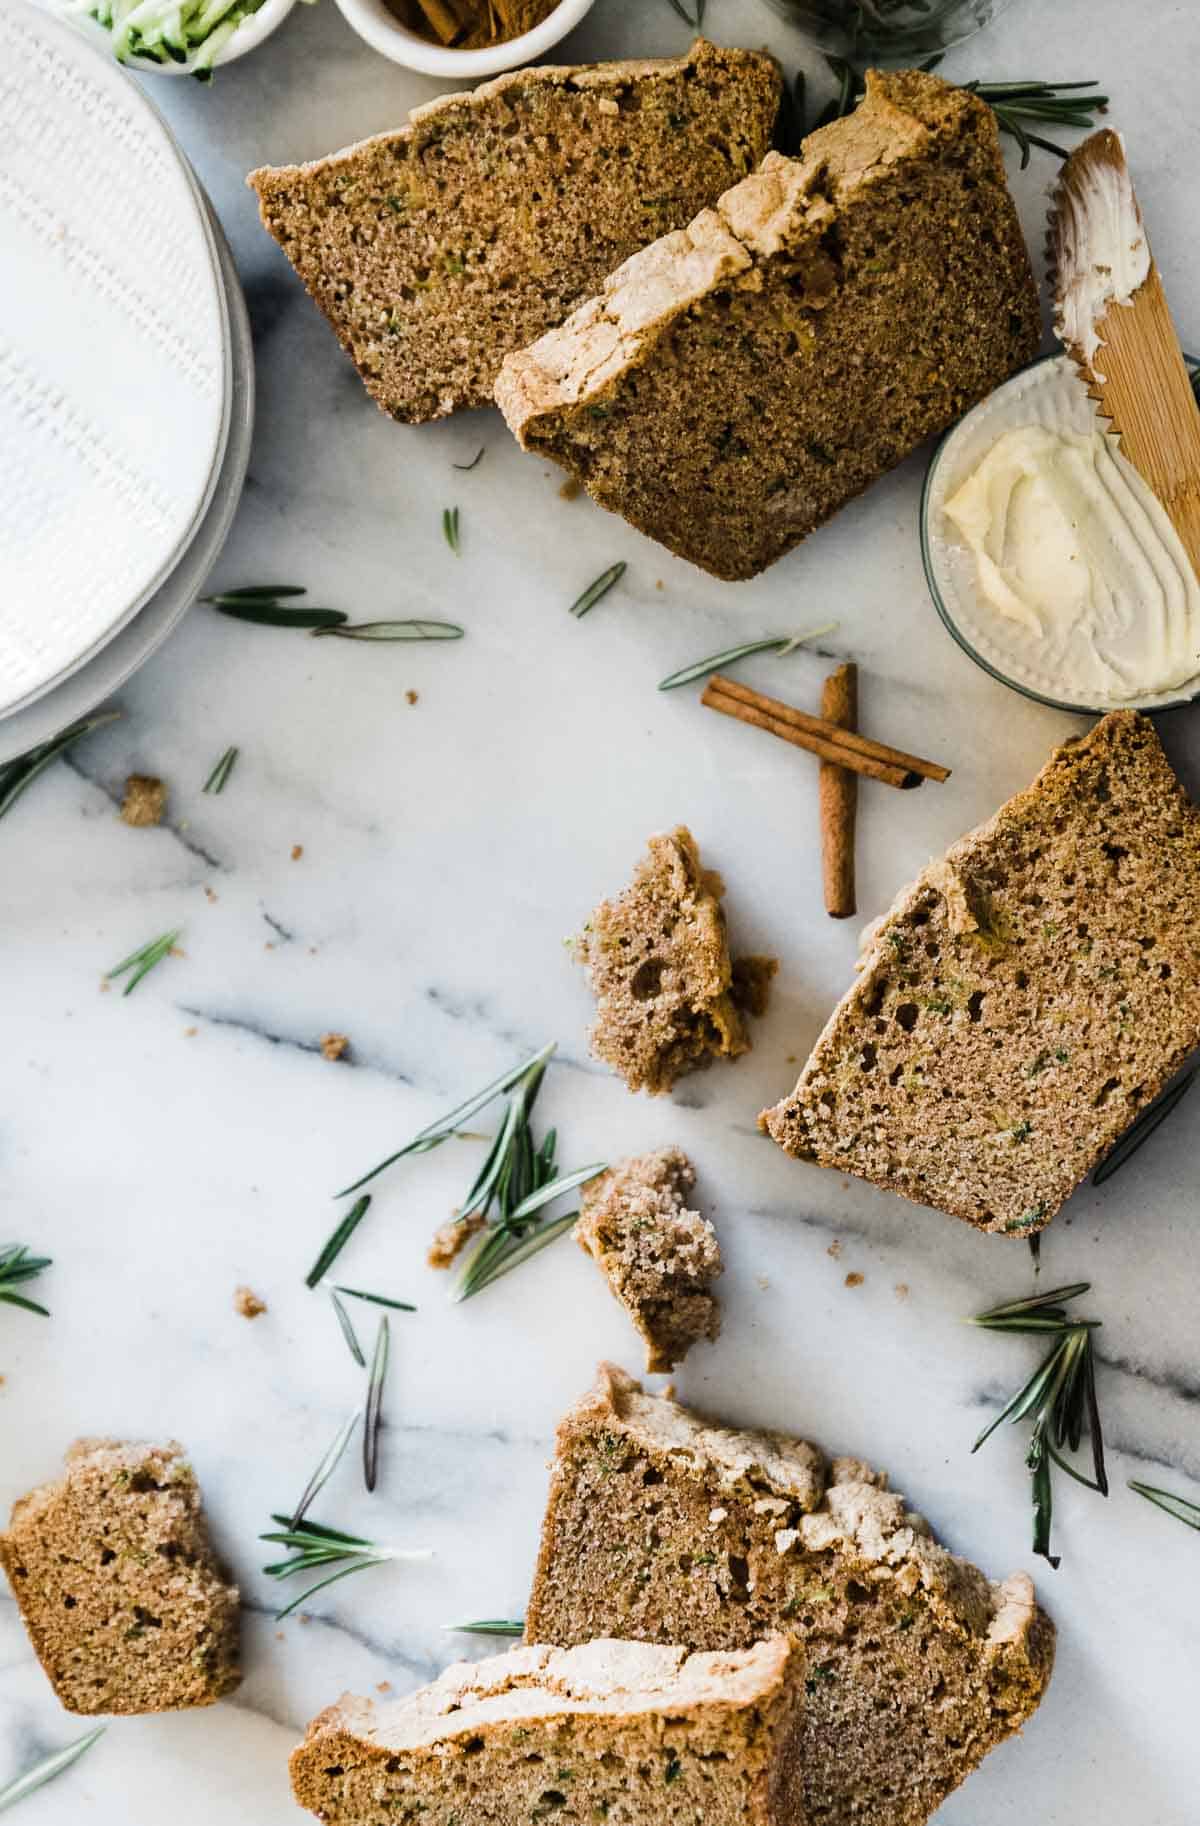 Slices of easy zucchini bread recipe laid on a marble counter. There are crumbs, rosemary sprigs, and cinnamon scattered around.